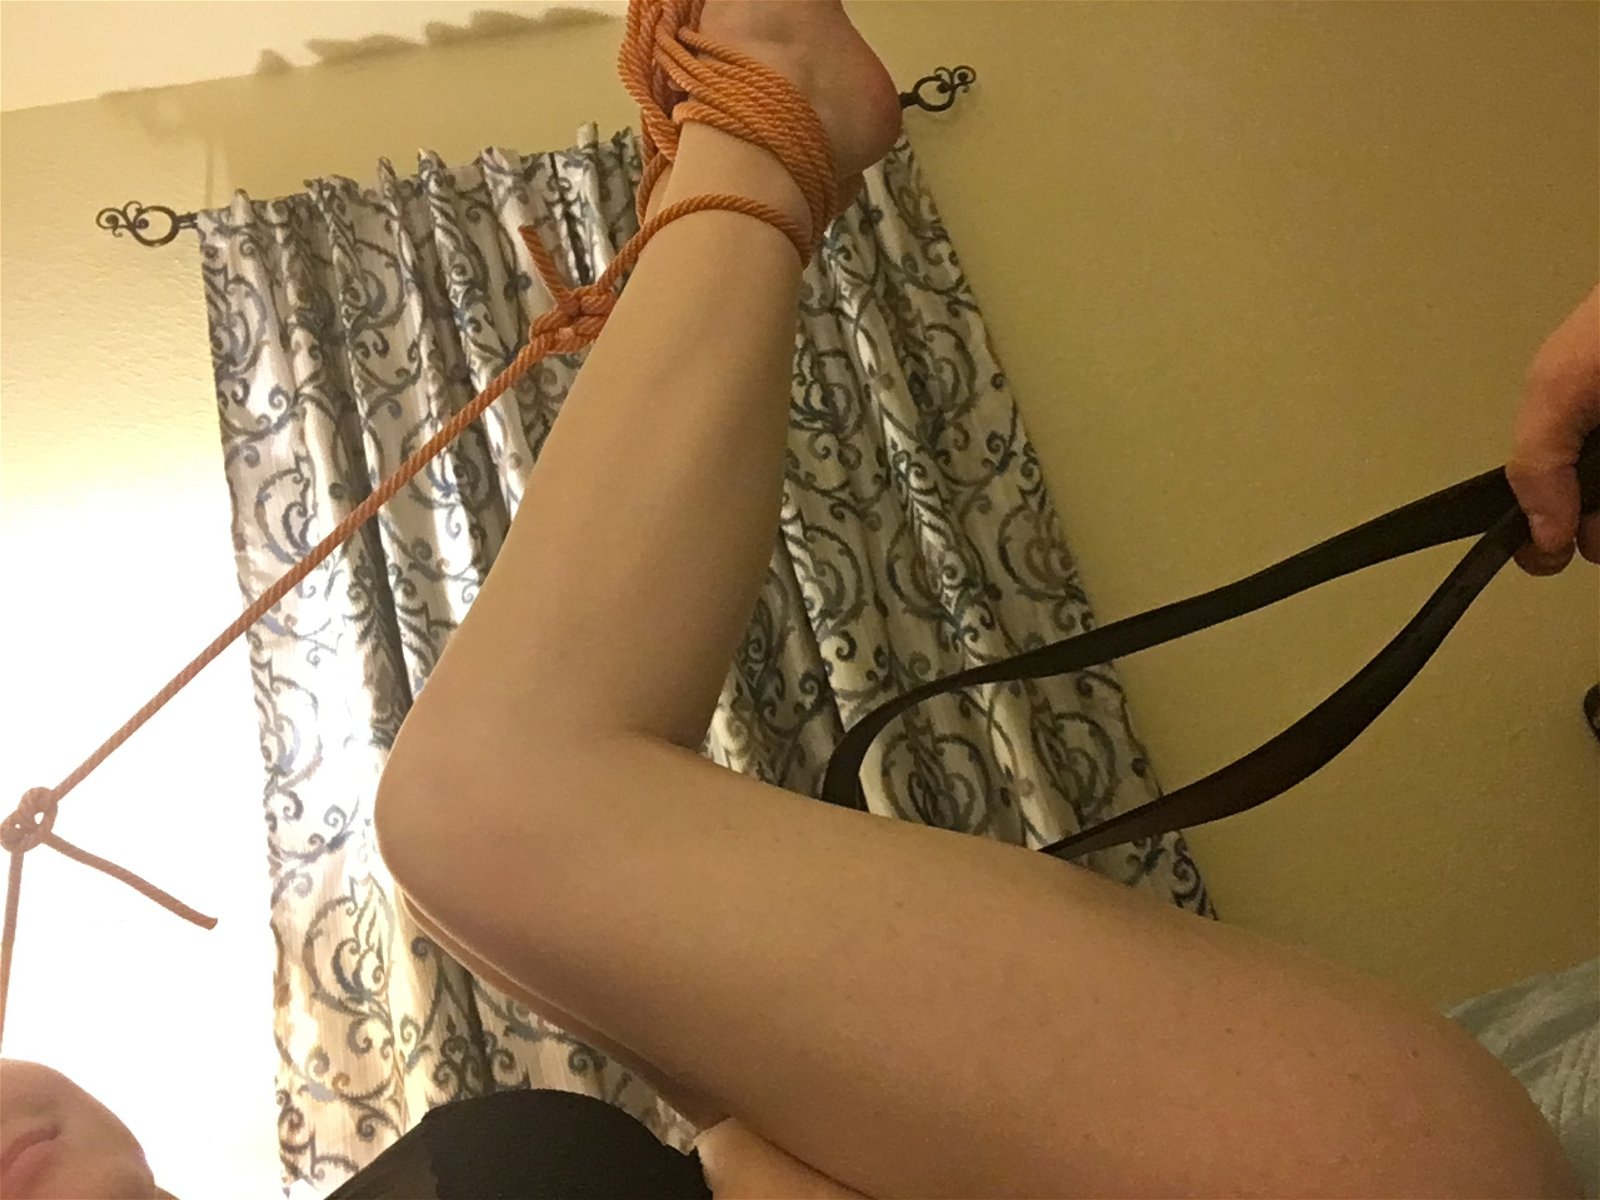 Watch the Photo by Mrs.Marston with the username @MrsMarston, who is a verified user, posted on December 31, 2019. The post is about the topic Bondage. and the text says 'All tied up... #belt #ropeplay #submissive #goodgirl #Sir'